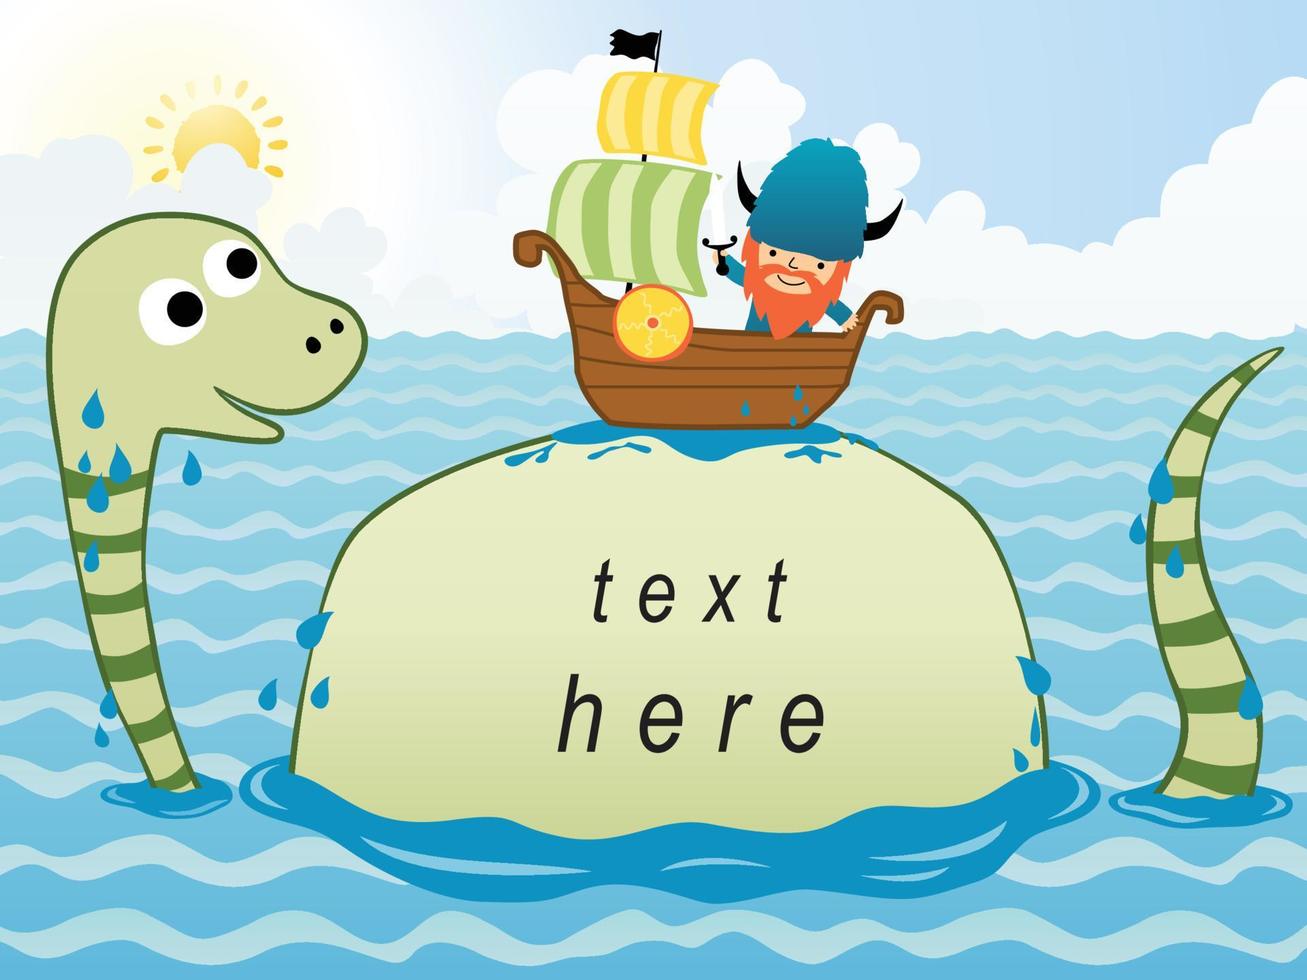 Vector illustration of cartoon Viking on sailboat with a sea monster, template for text